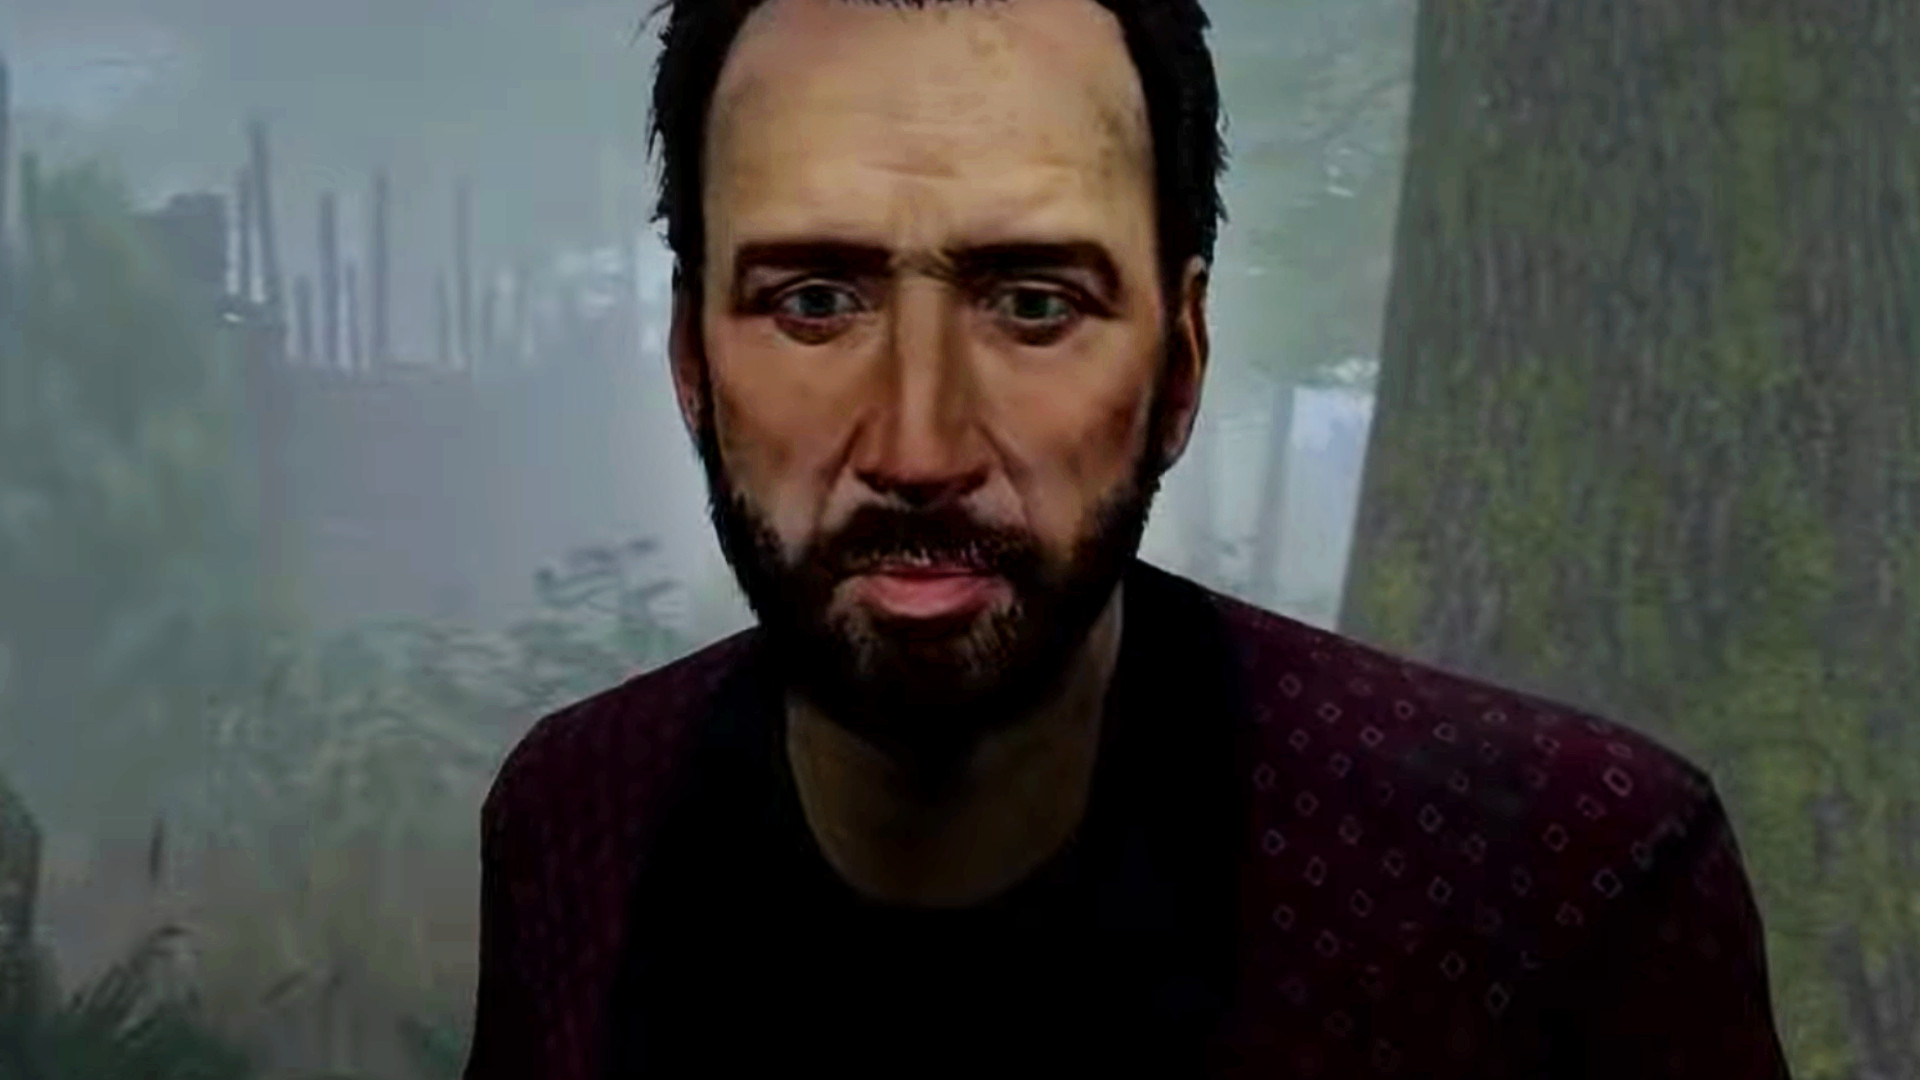 Nic Cage wants to fuse with you in Dead By Daylight